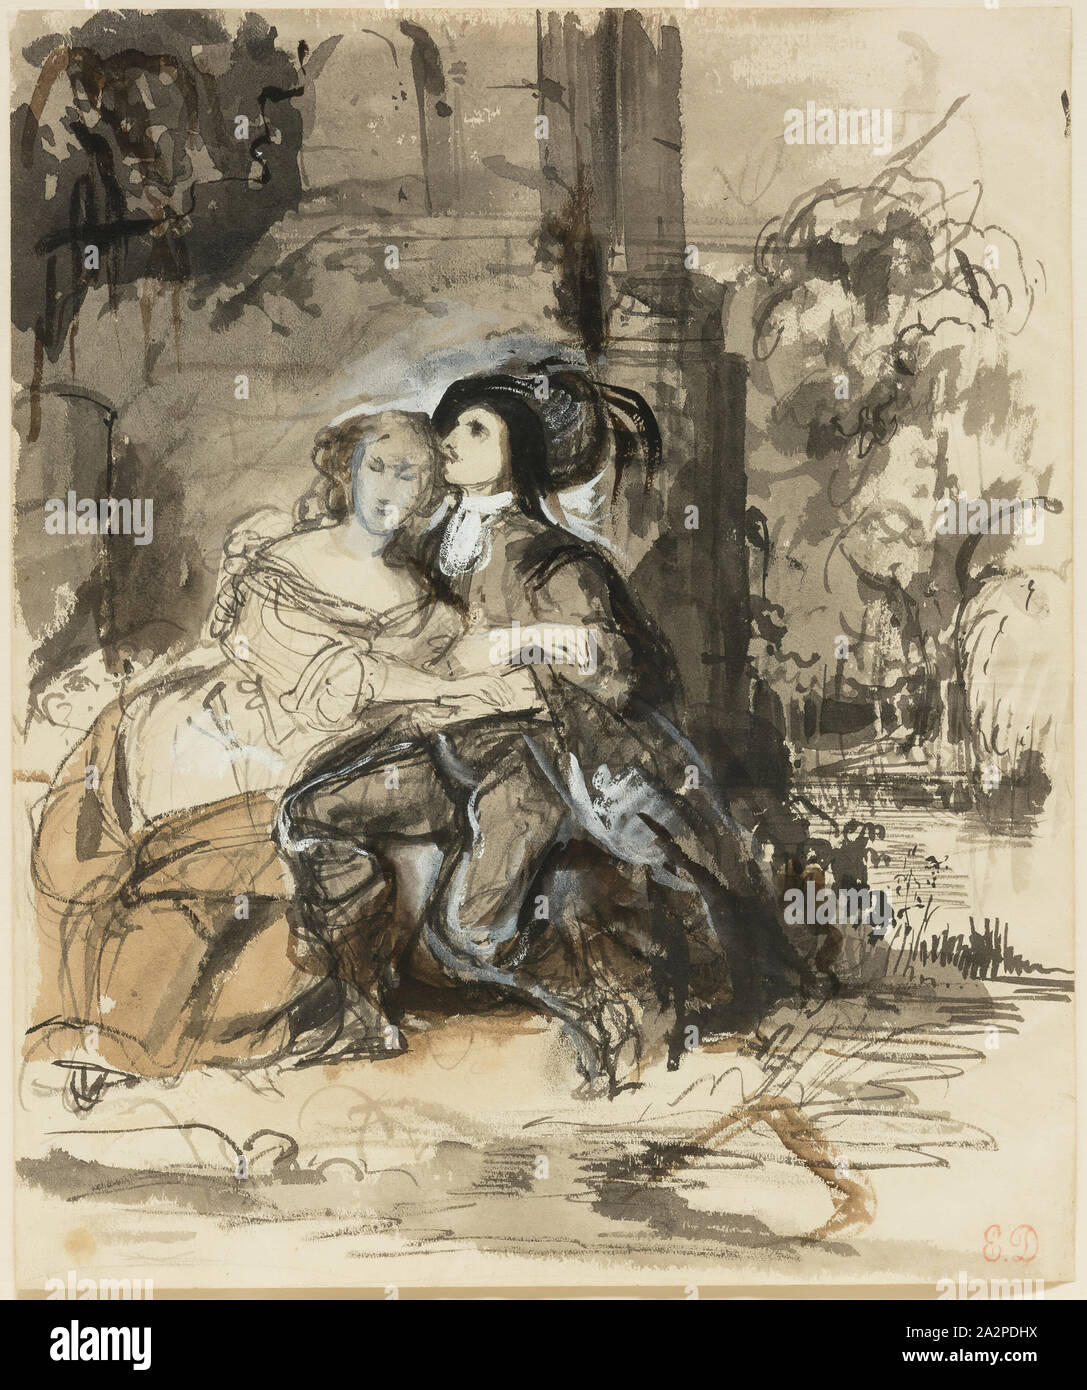 Eugène Delacroix, French, 1798-1863, Ravenswood and Lucy at the Mermaiden's Fountain, c. 1829, Black, brown, and grey washes, heightened with white on wove paper, Sheet: 8 5/8 x 7 3/16 in. (21.9 x 18.3 cm Stock Photo